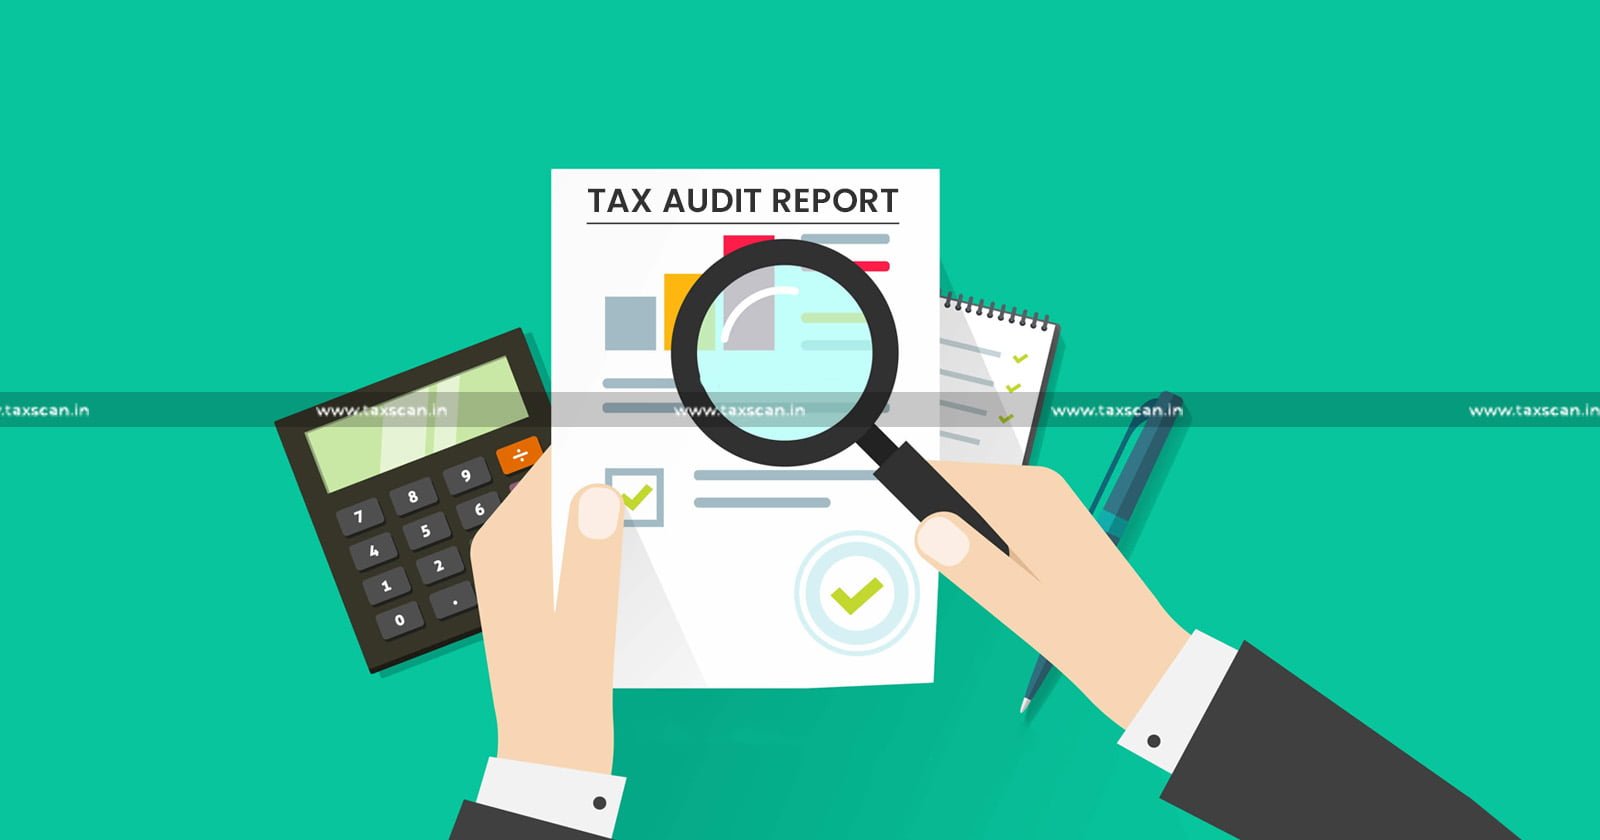 Completion of Audit - Audit - Furnishing of Tax Audit Report - Tax Audit Report - Assessment Proceedings - ITAT - Penalty - Taxscan